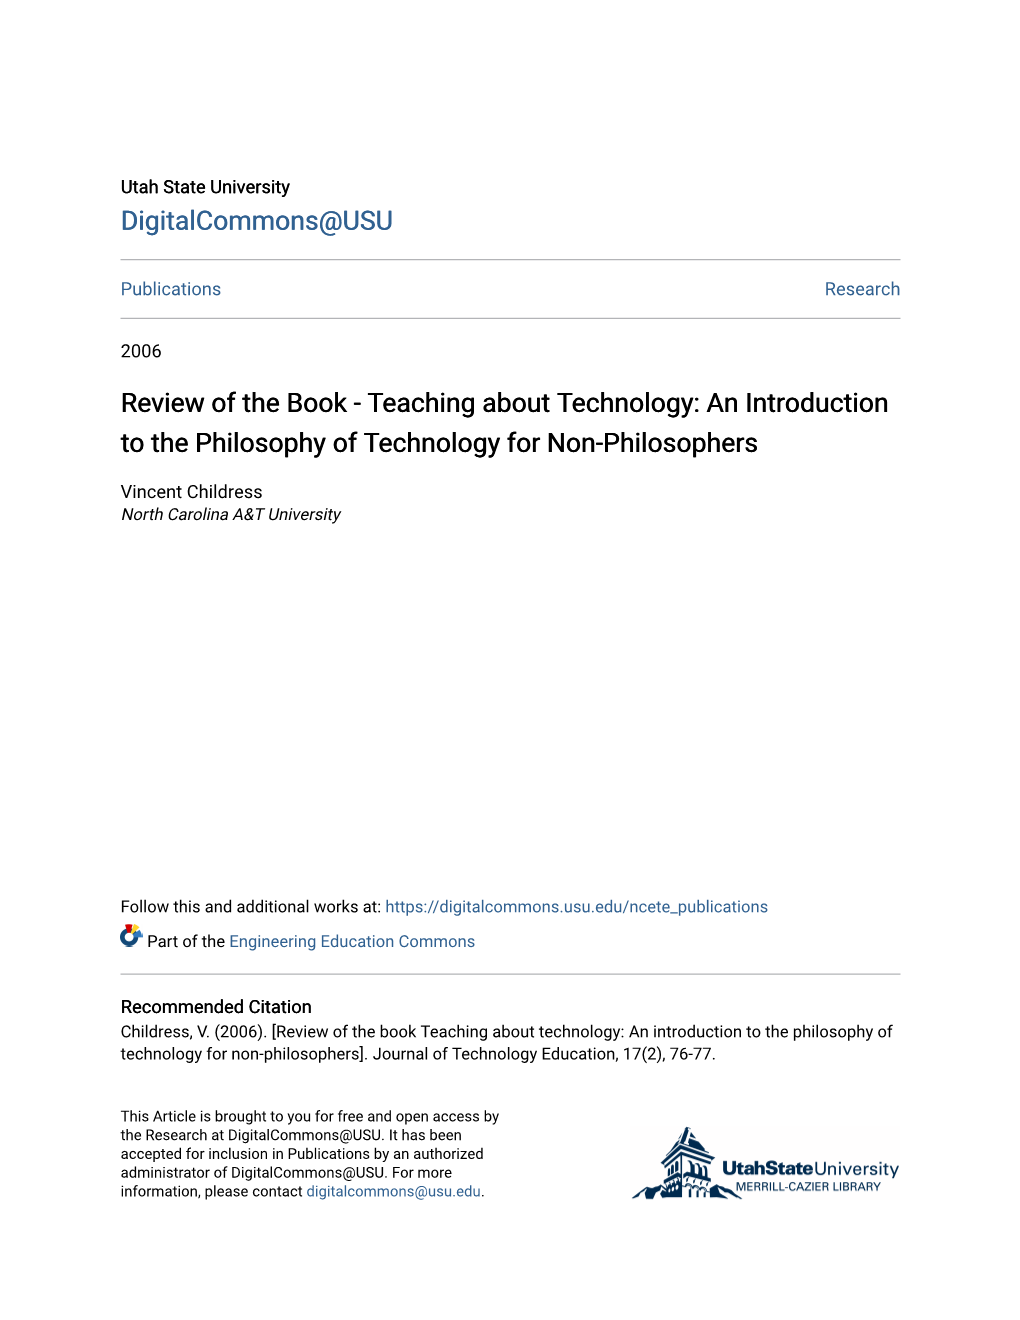 An Introduction to the Philosophy of Technology for Non-Philosophers